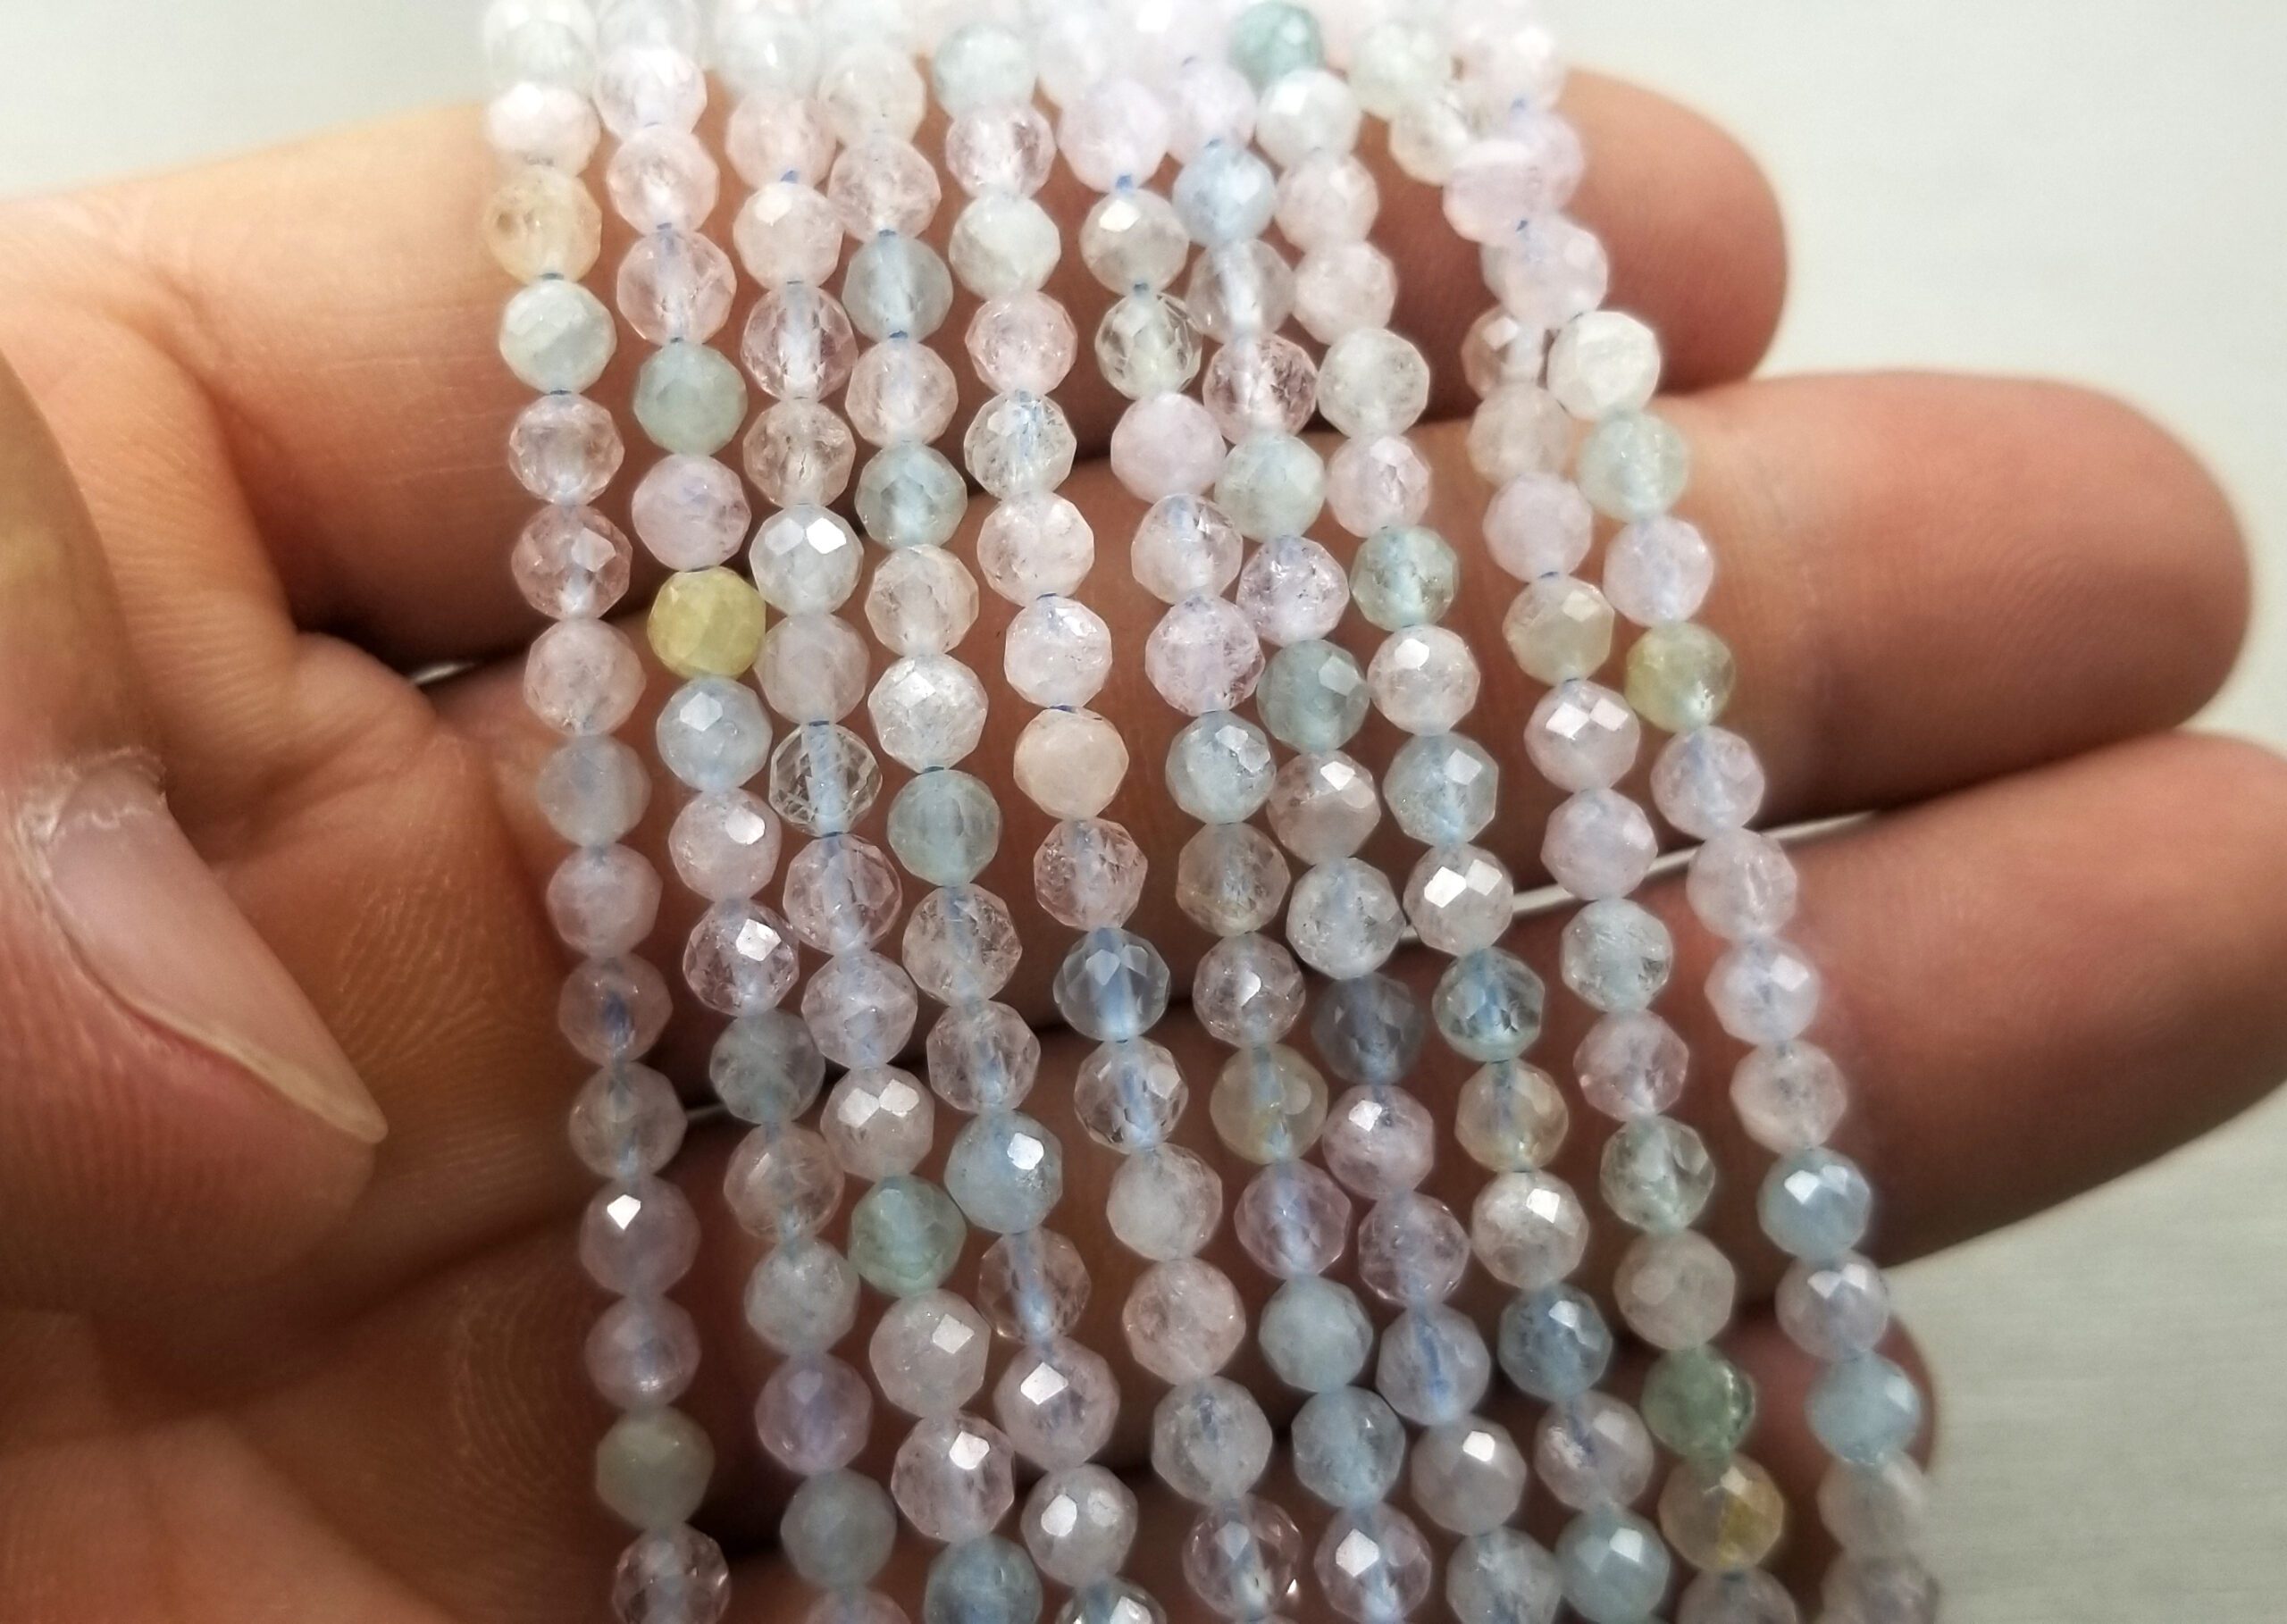 Natural 4mm Round Faceted Morganite Stone Gemstone Jewelry Beads Strand 15" 